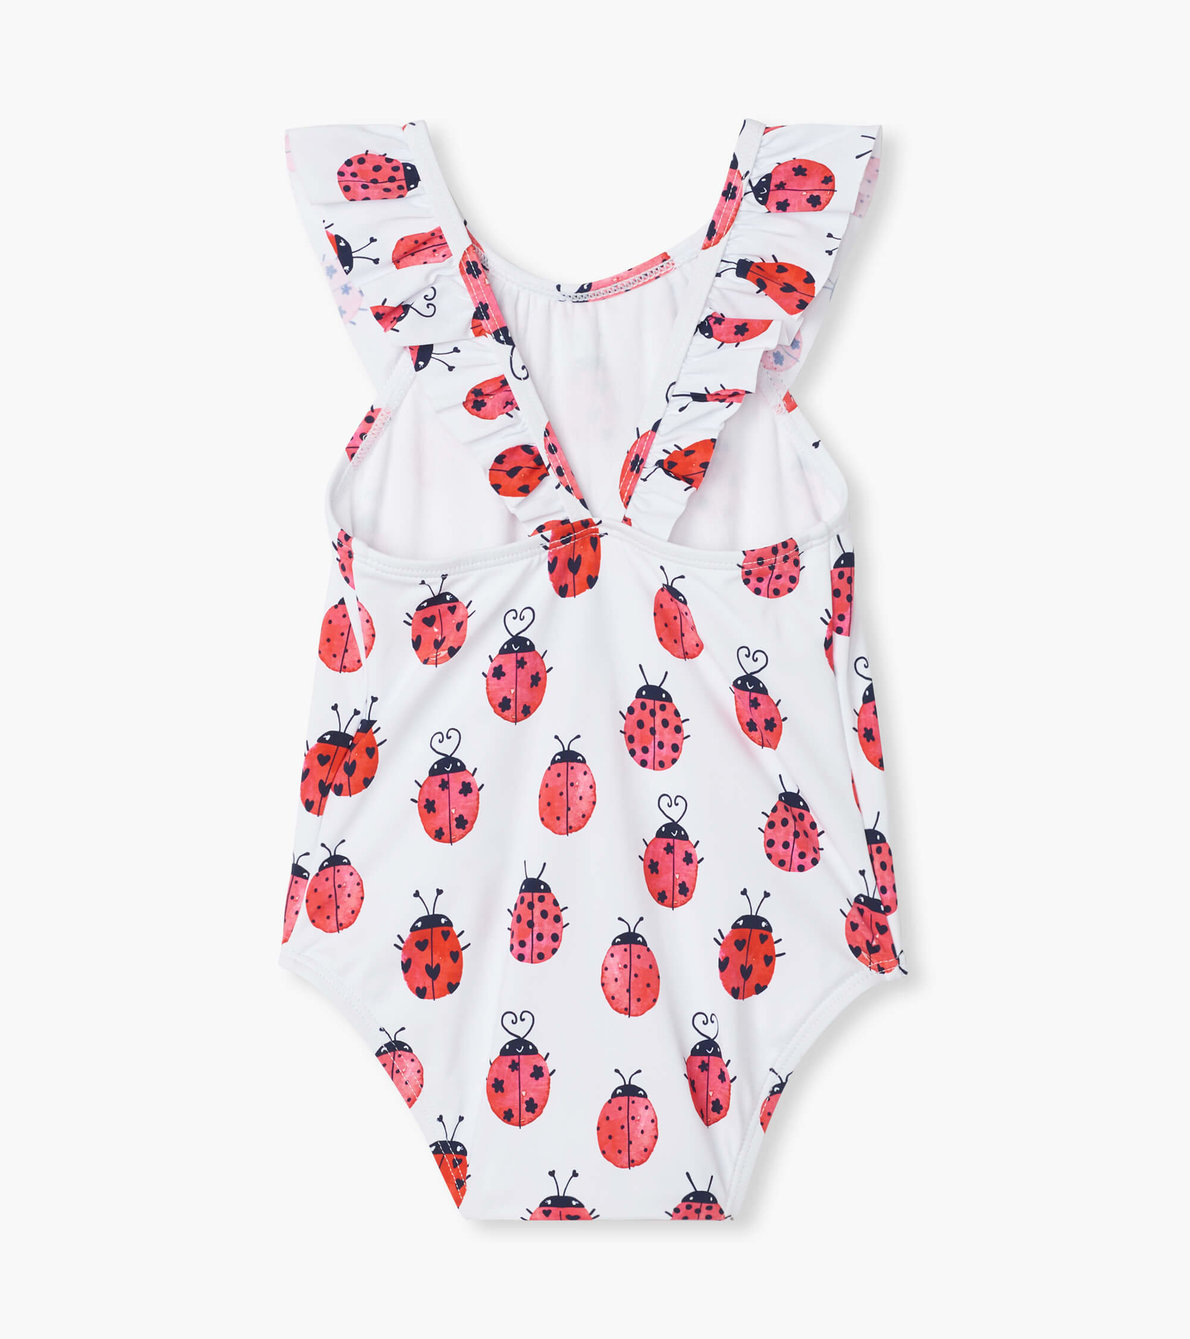 View larger image of Love Bugs Baby Ruffle Swimsuit